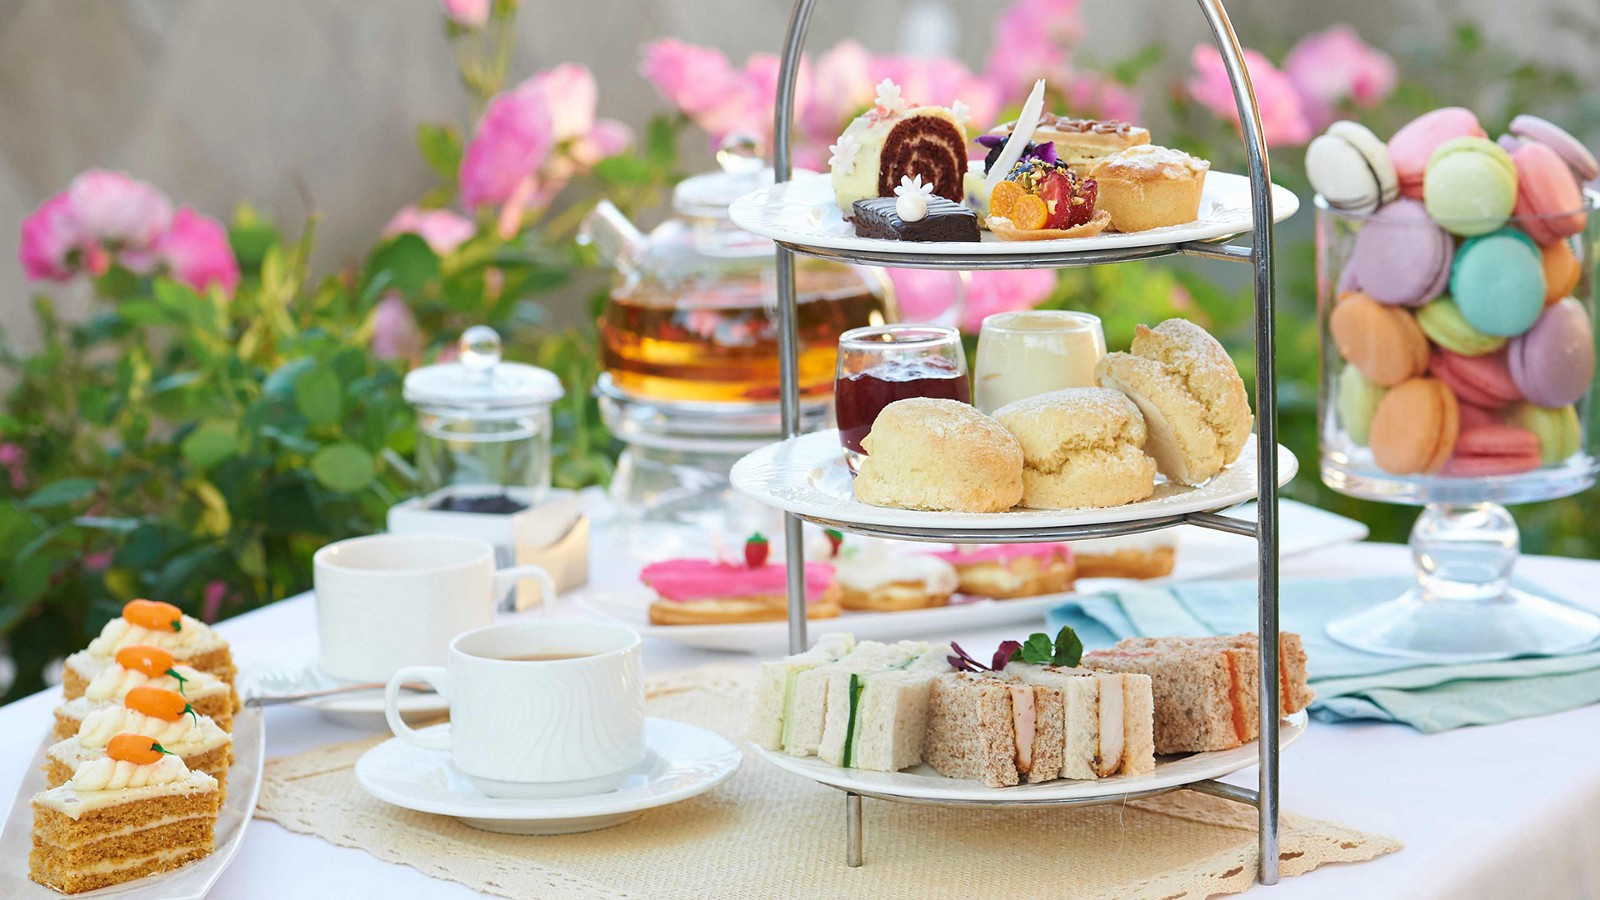 Afternoon Tea Party Ideas
 From Afternoon to High Tea Your Guide to Hosting Tea Parties